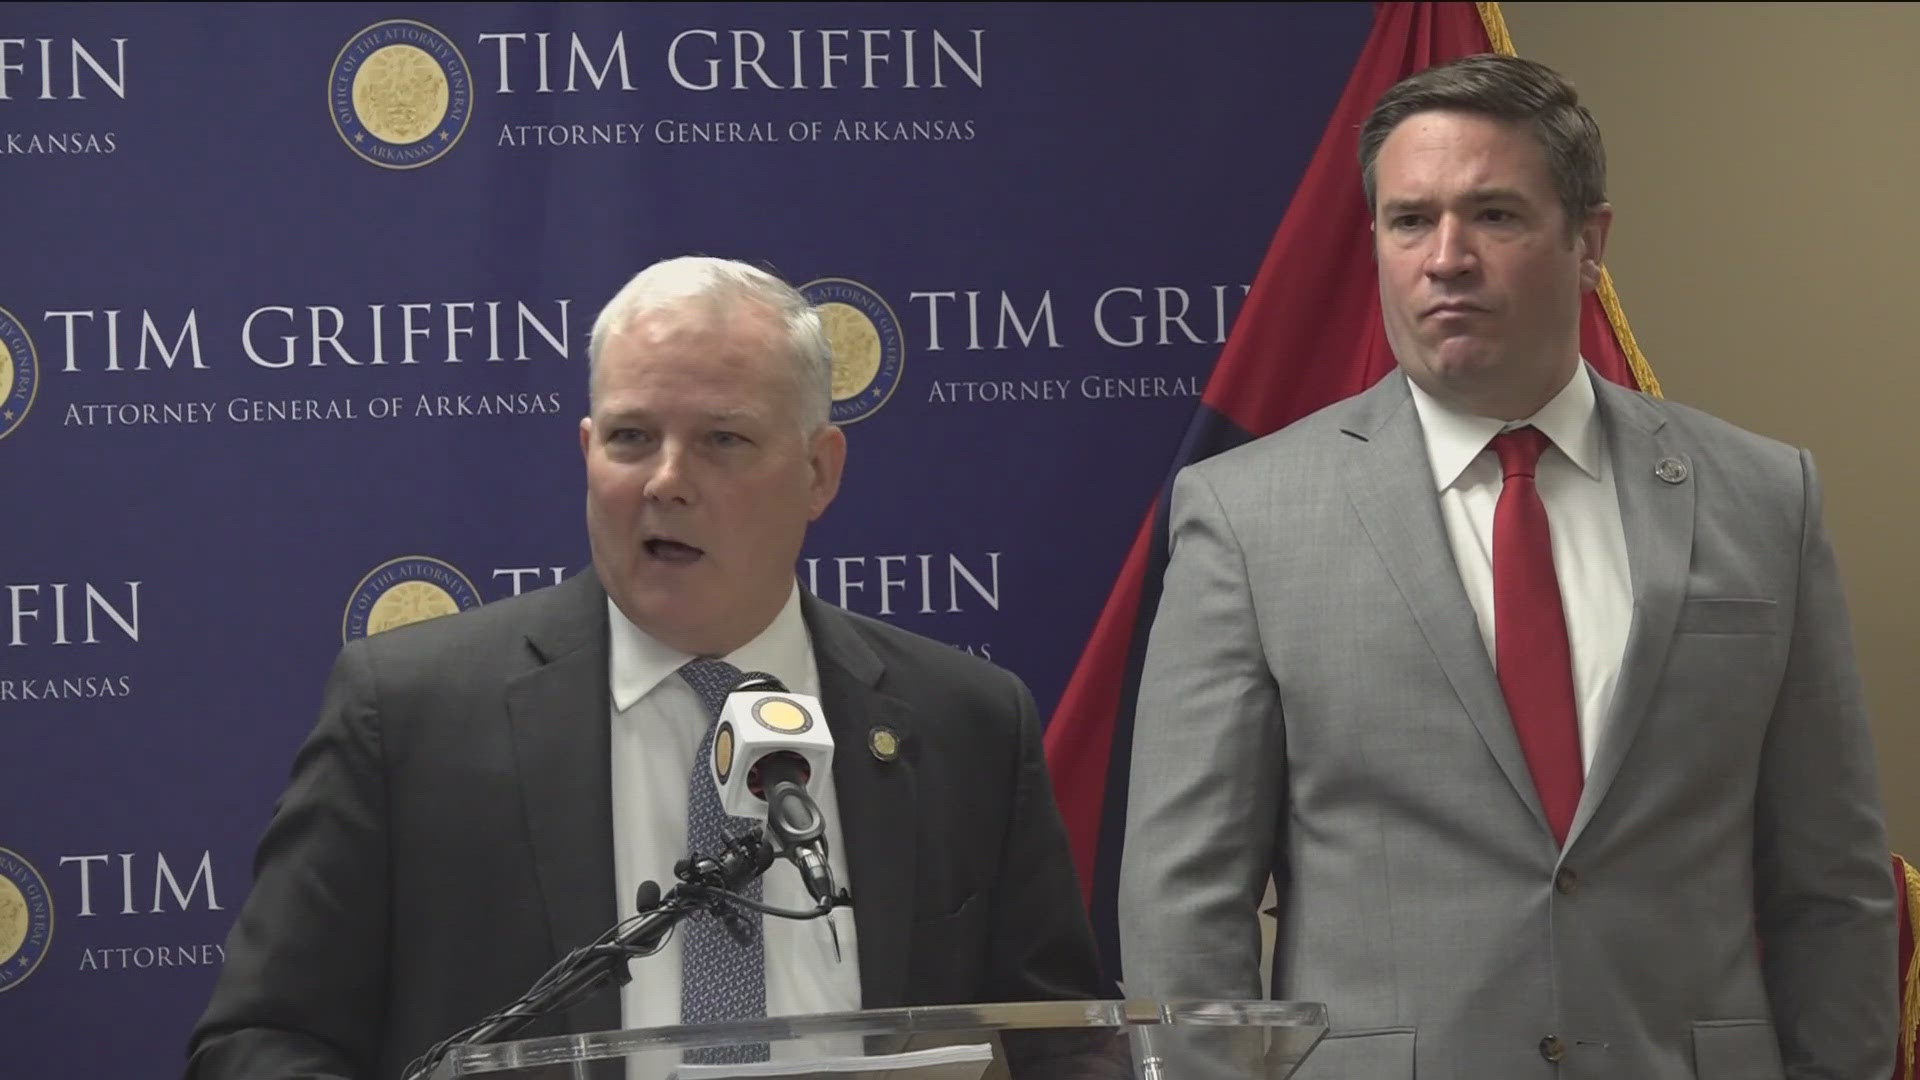 "This rule change is a welcome mat for more of that unacceptable behavior ... so we had no choice but to do this," Arkansas Attorney General Tim Griffin said